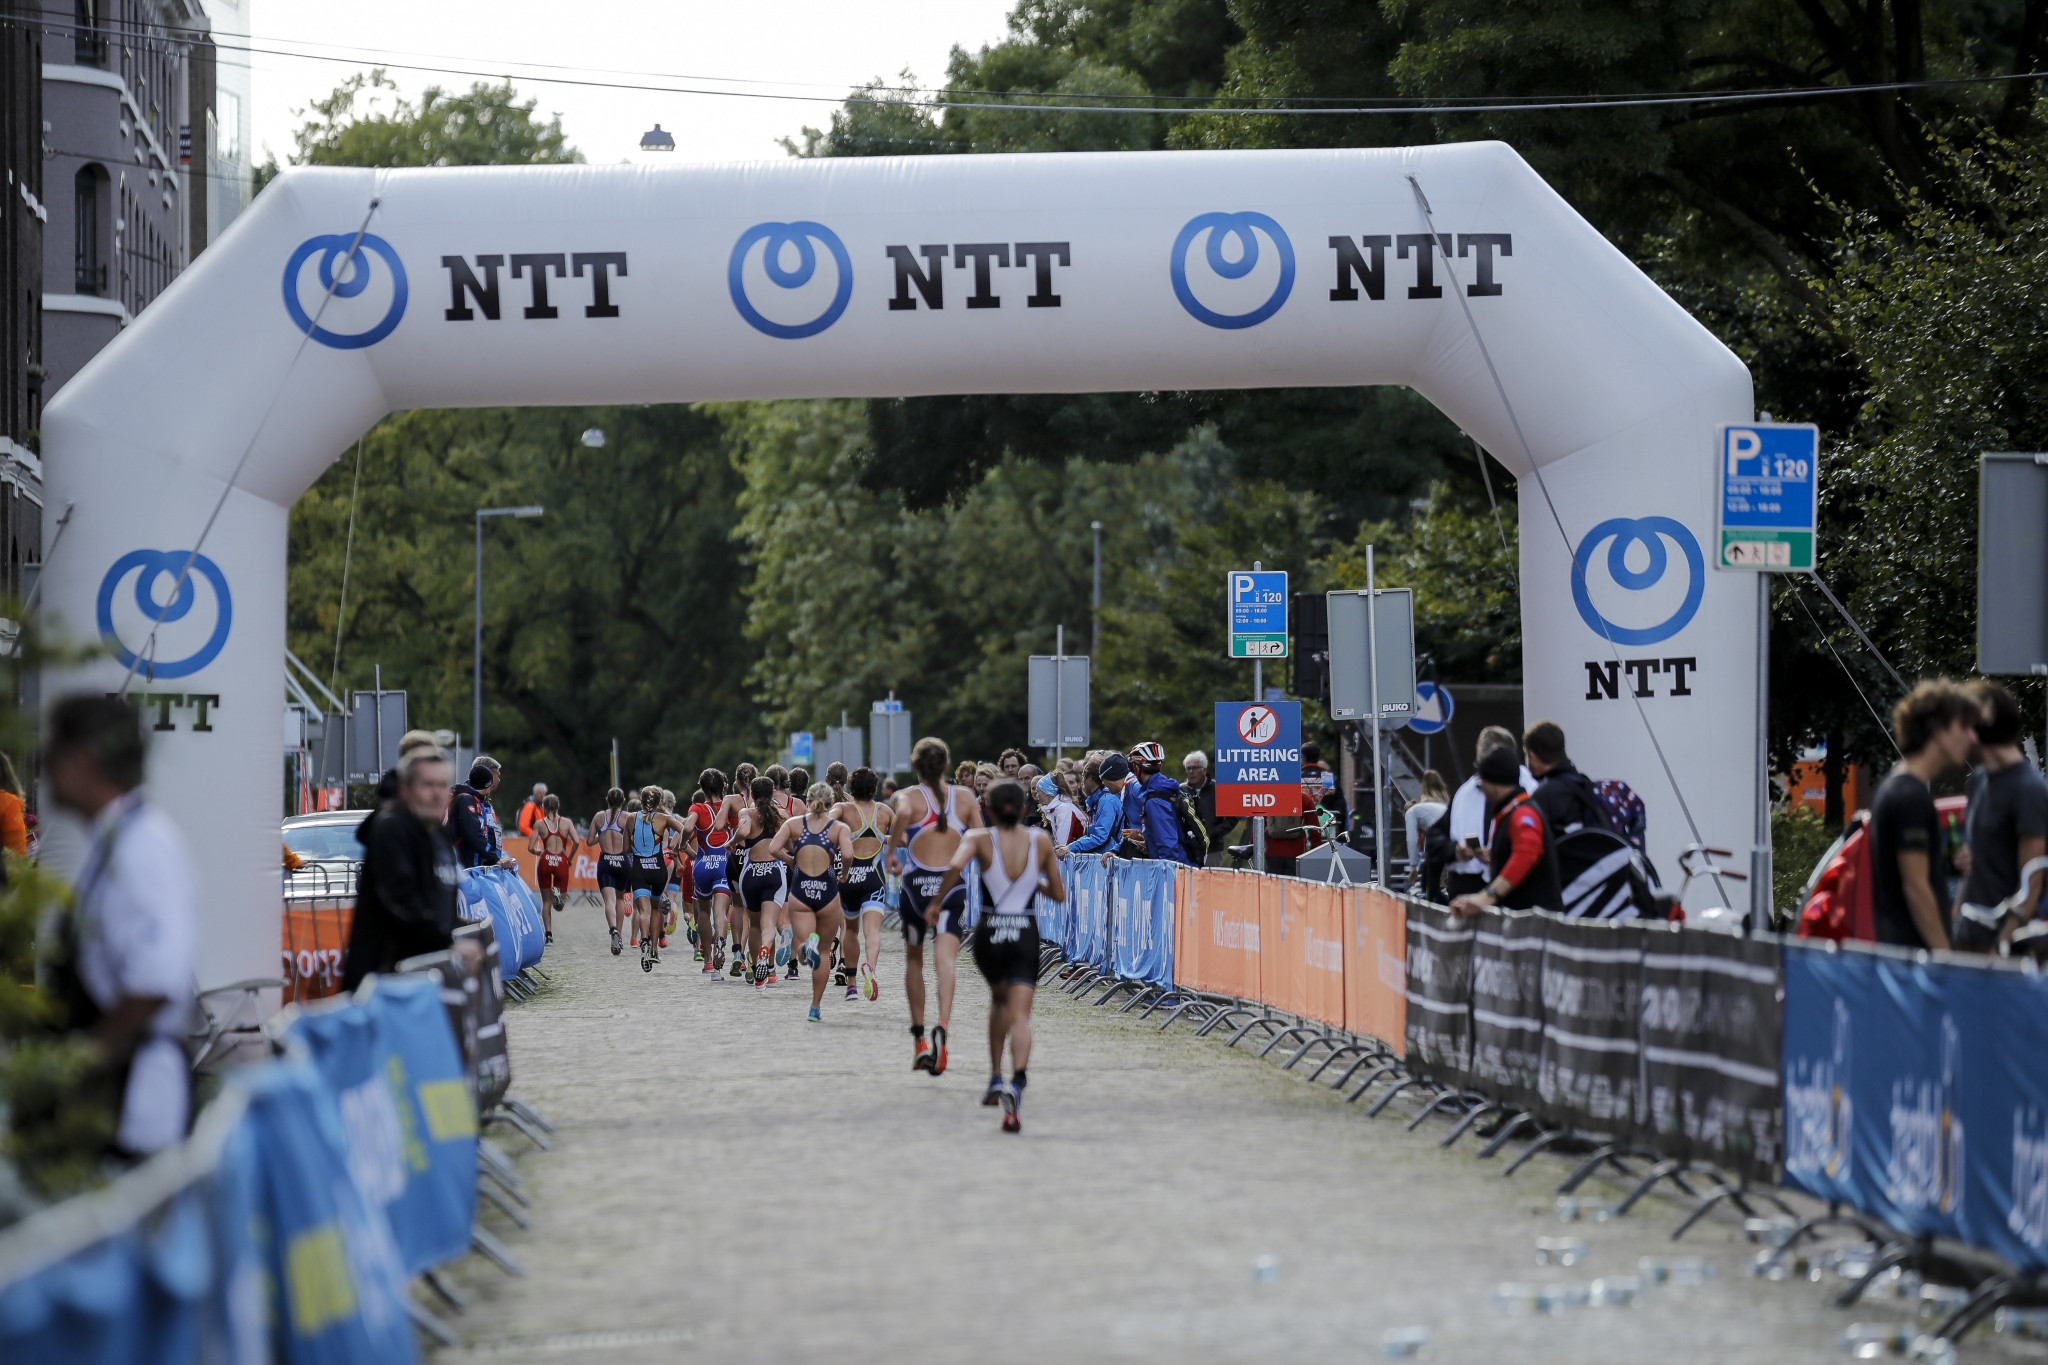 The NTT Group have renewed their partnership to become a global partner of the International Triathlon Union ©ITU